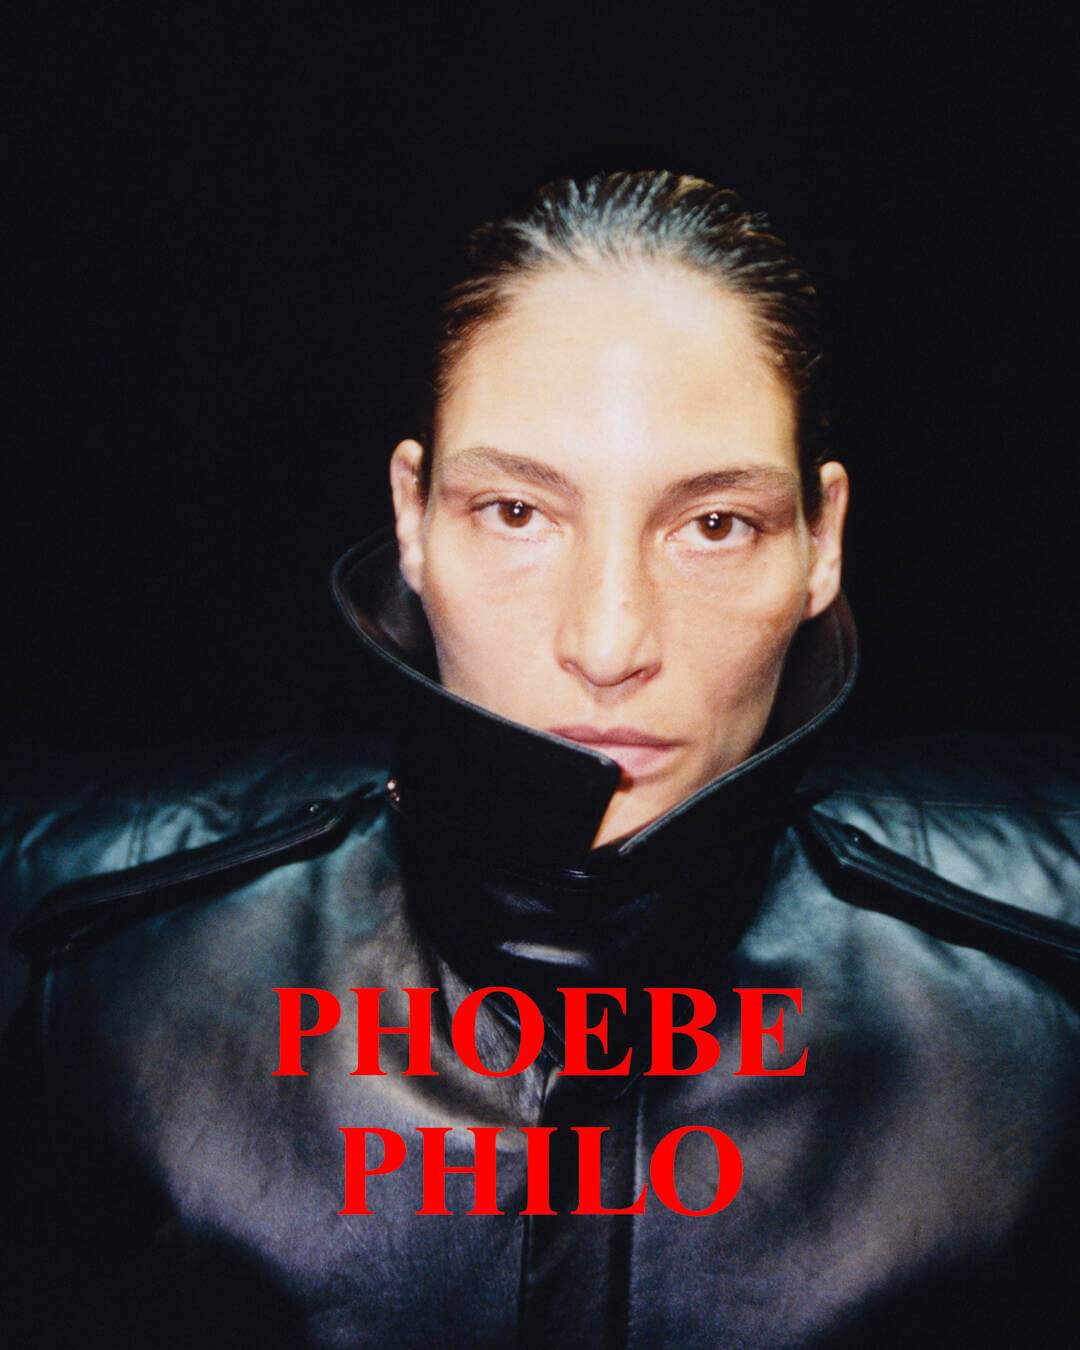 Phoebe Philo is back with a long-awaited collection – just when we